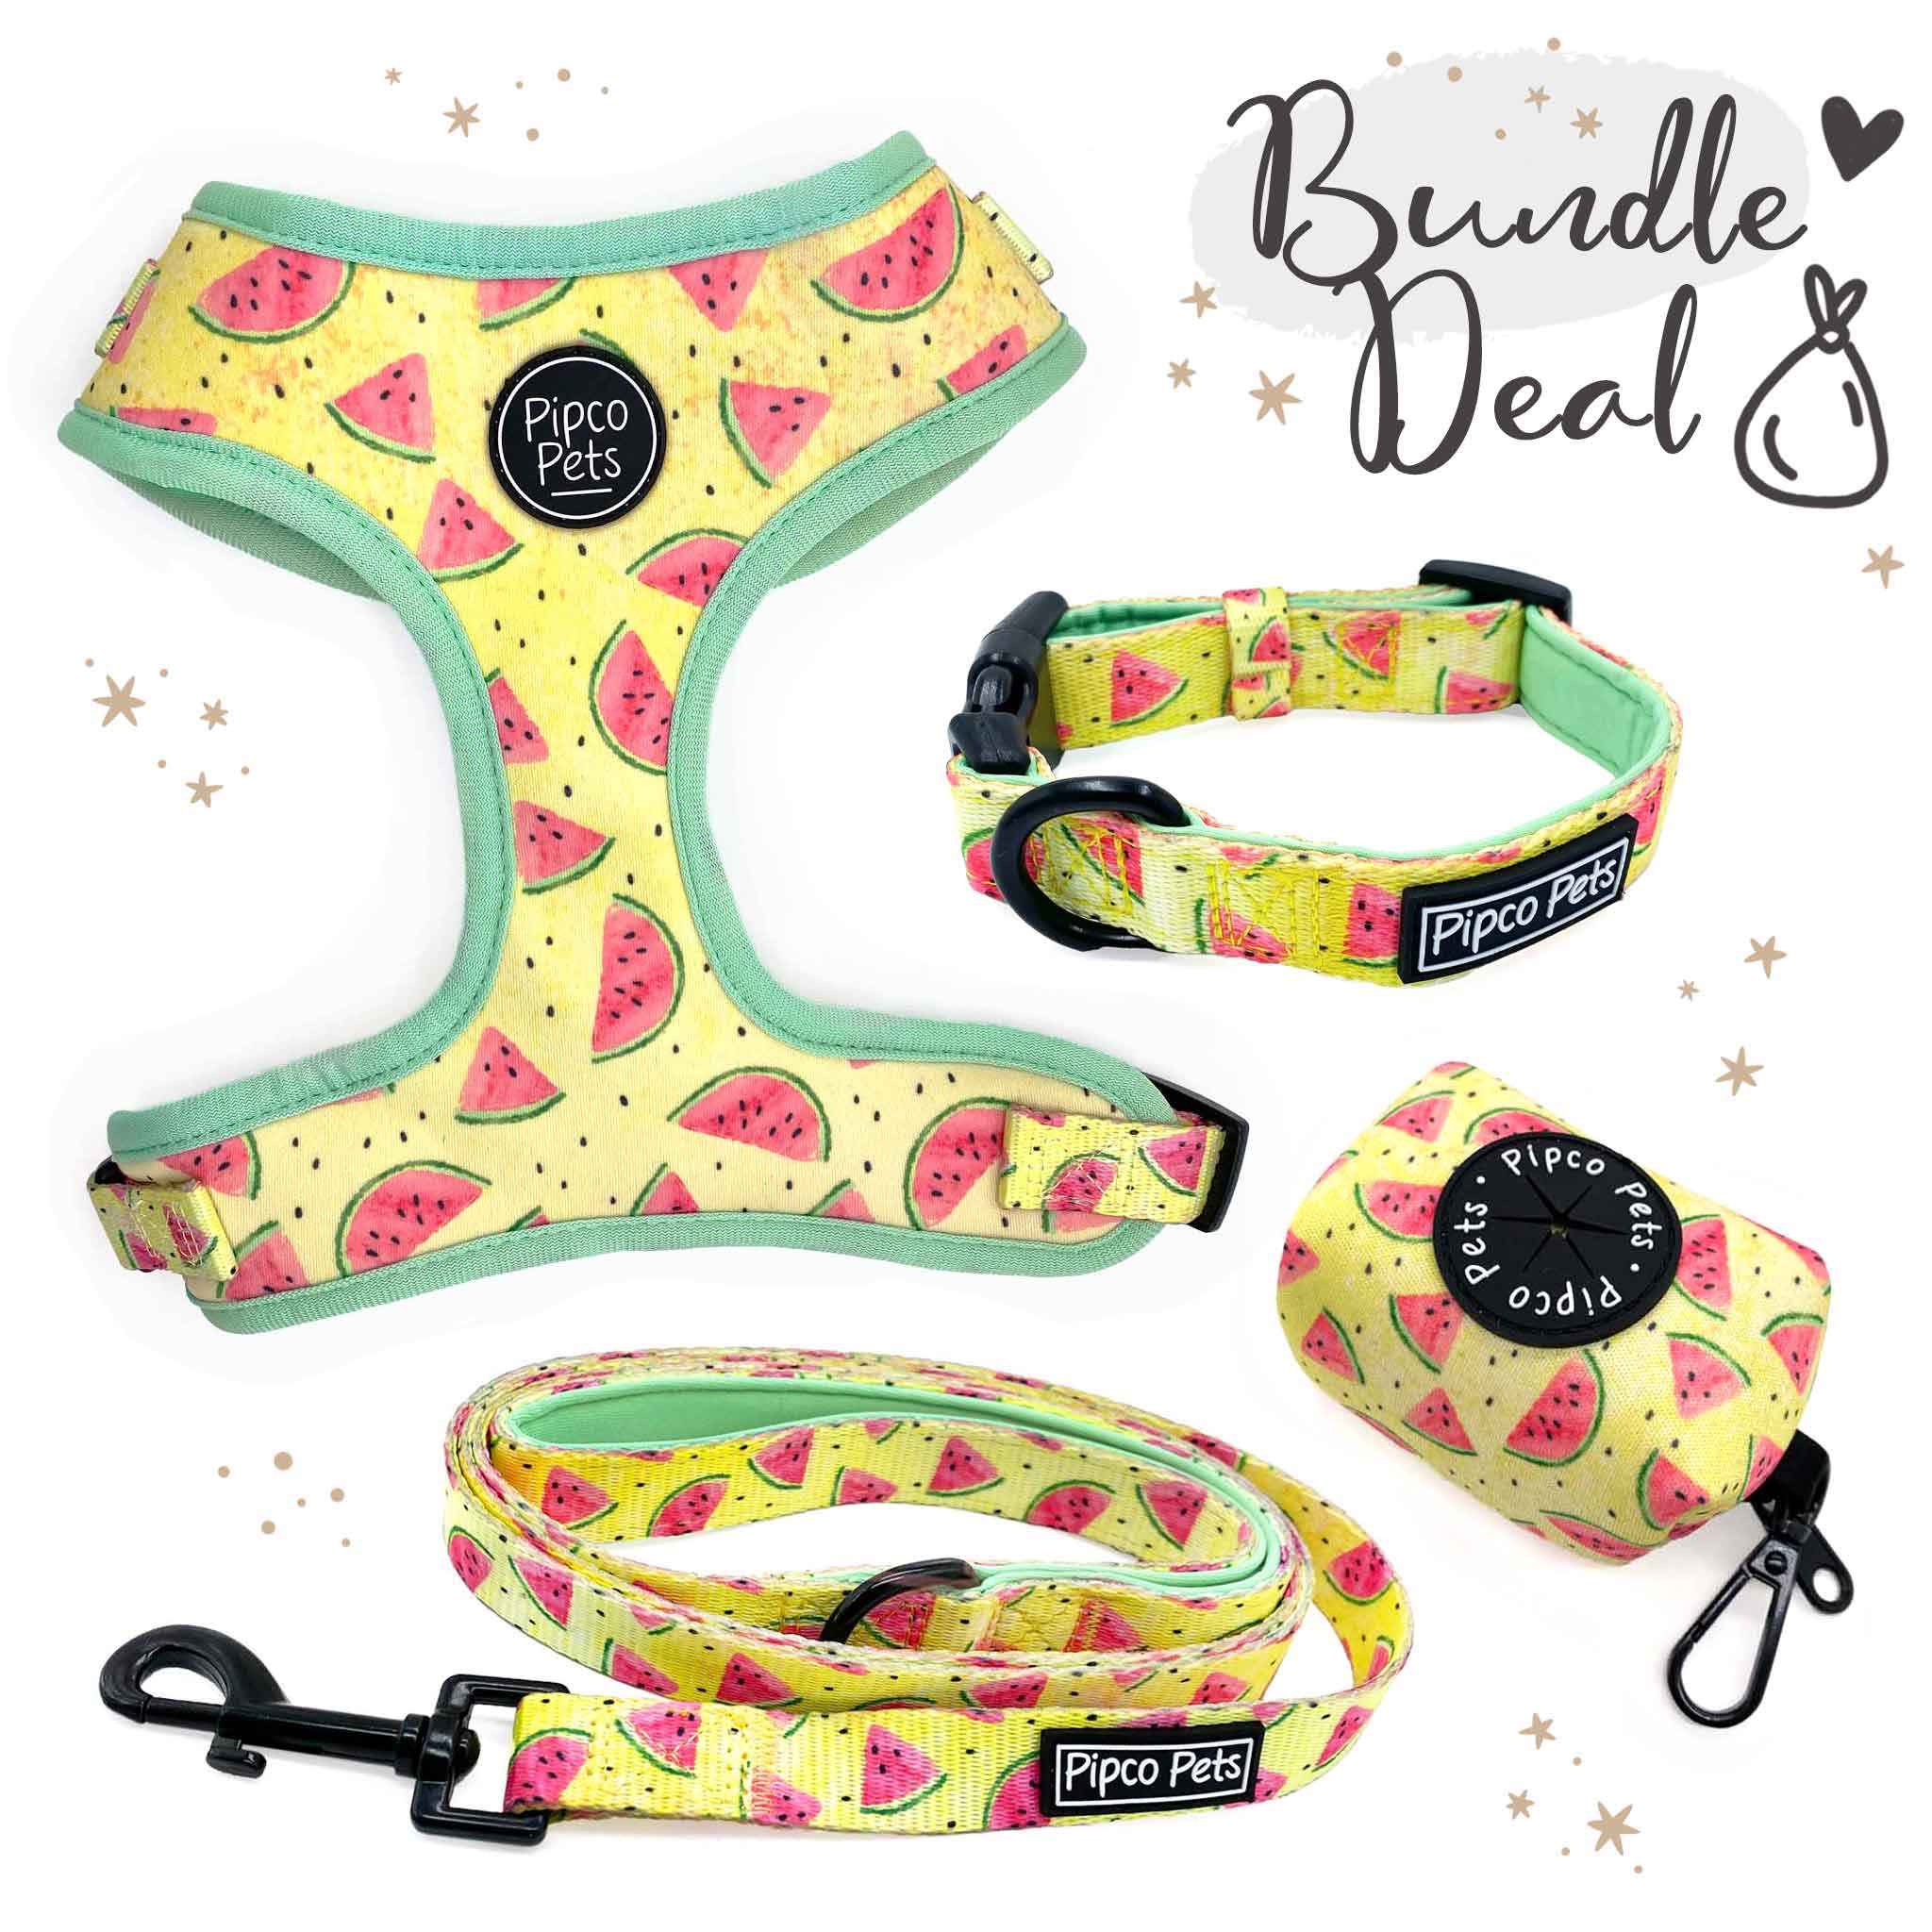 Bundle set including Pipco Pets dog harness, collar, lead, and poo bag dispenser with matching Summer Melons watermelon print pattern in yellow